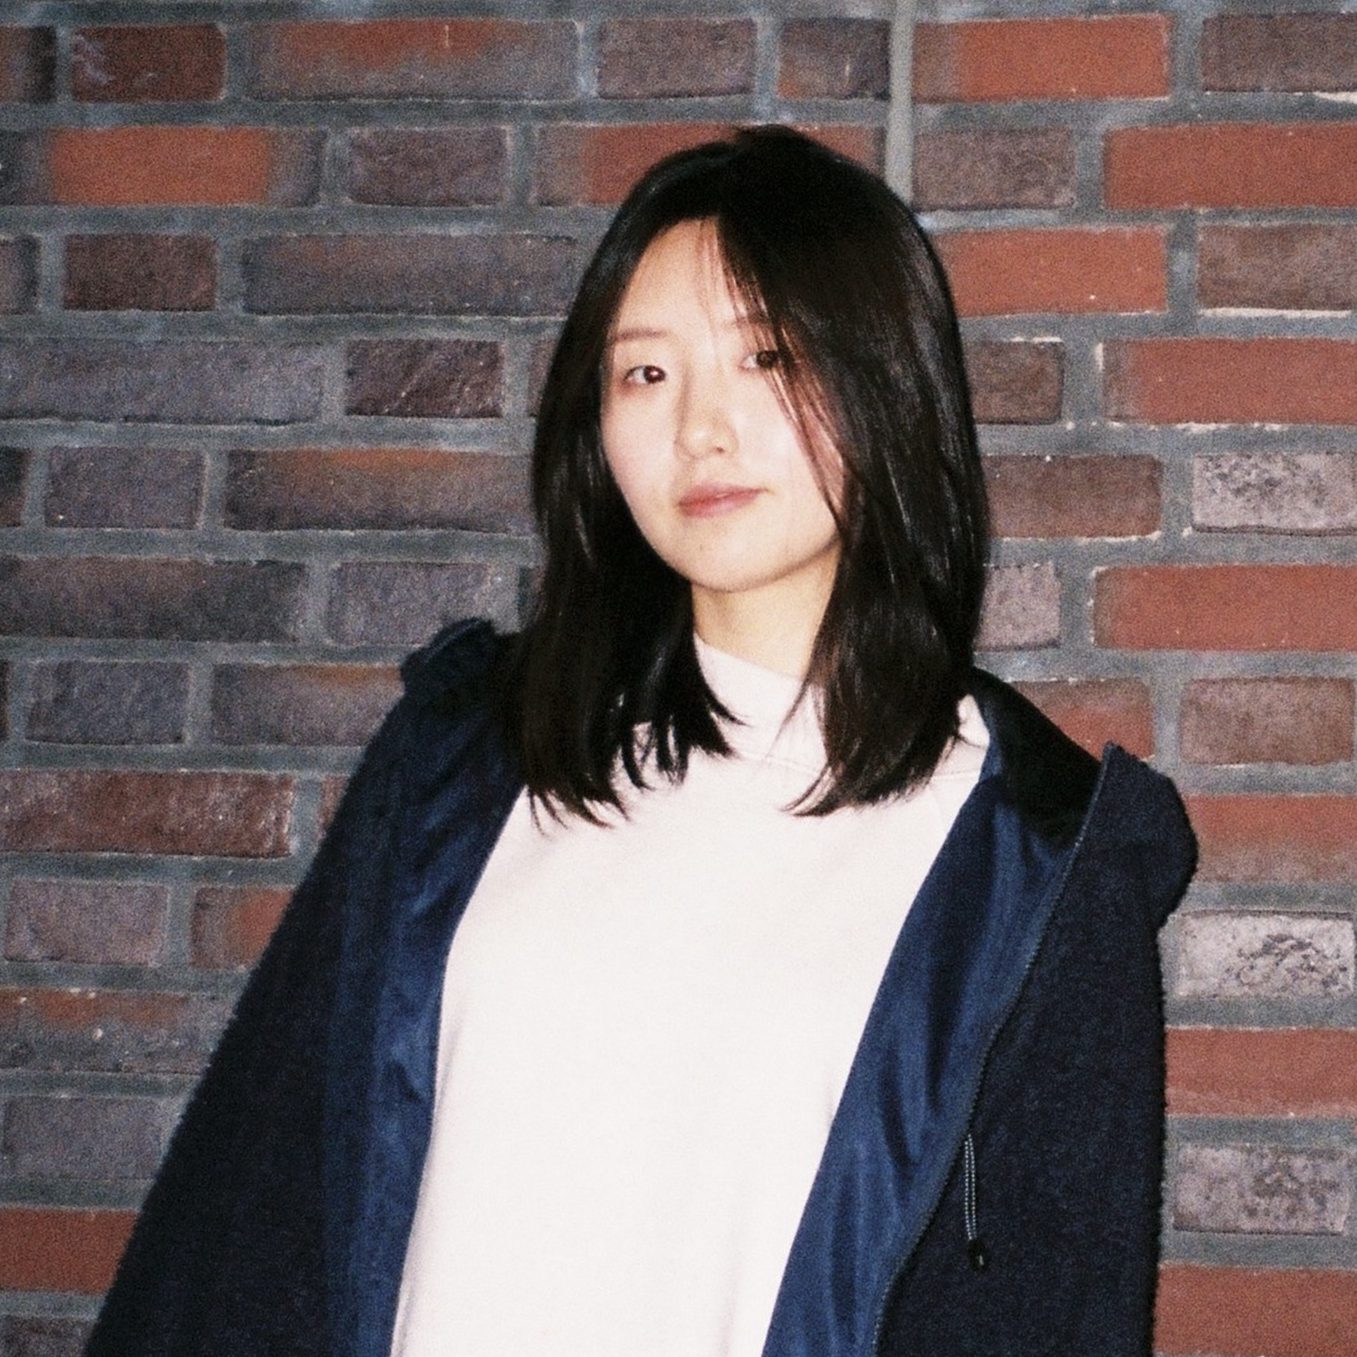 Peiyu is wearing a white shirt with a black coat, standing in front of a colourful brick wall.